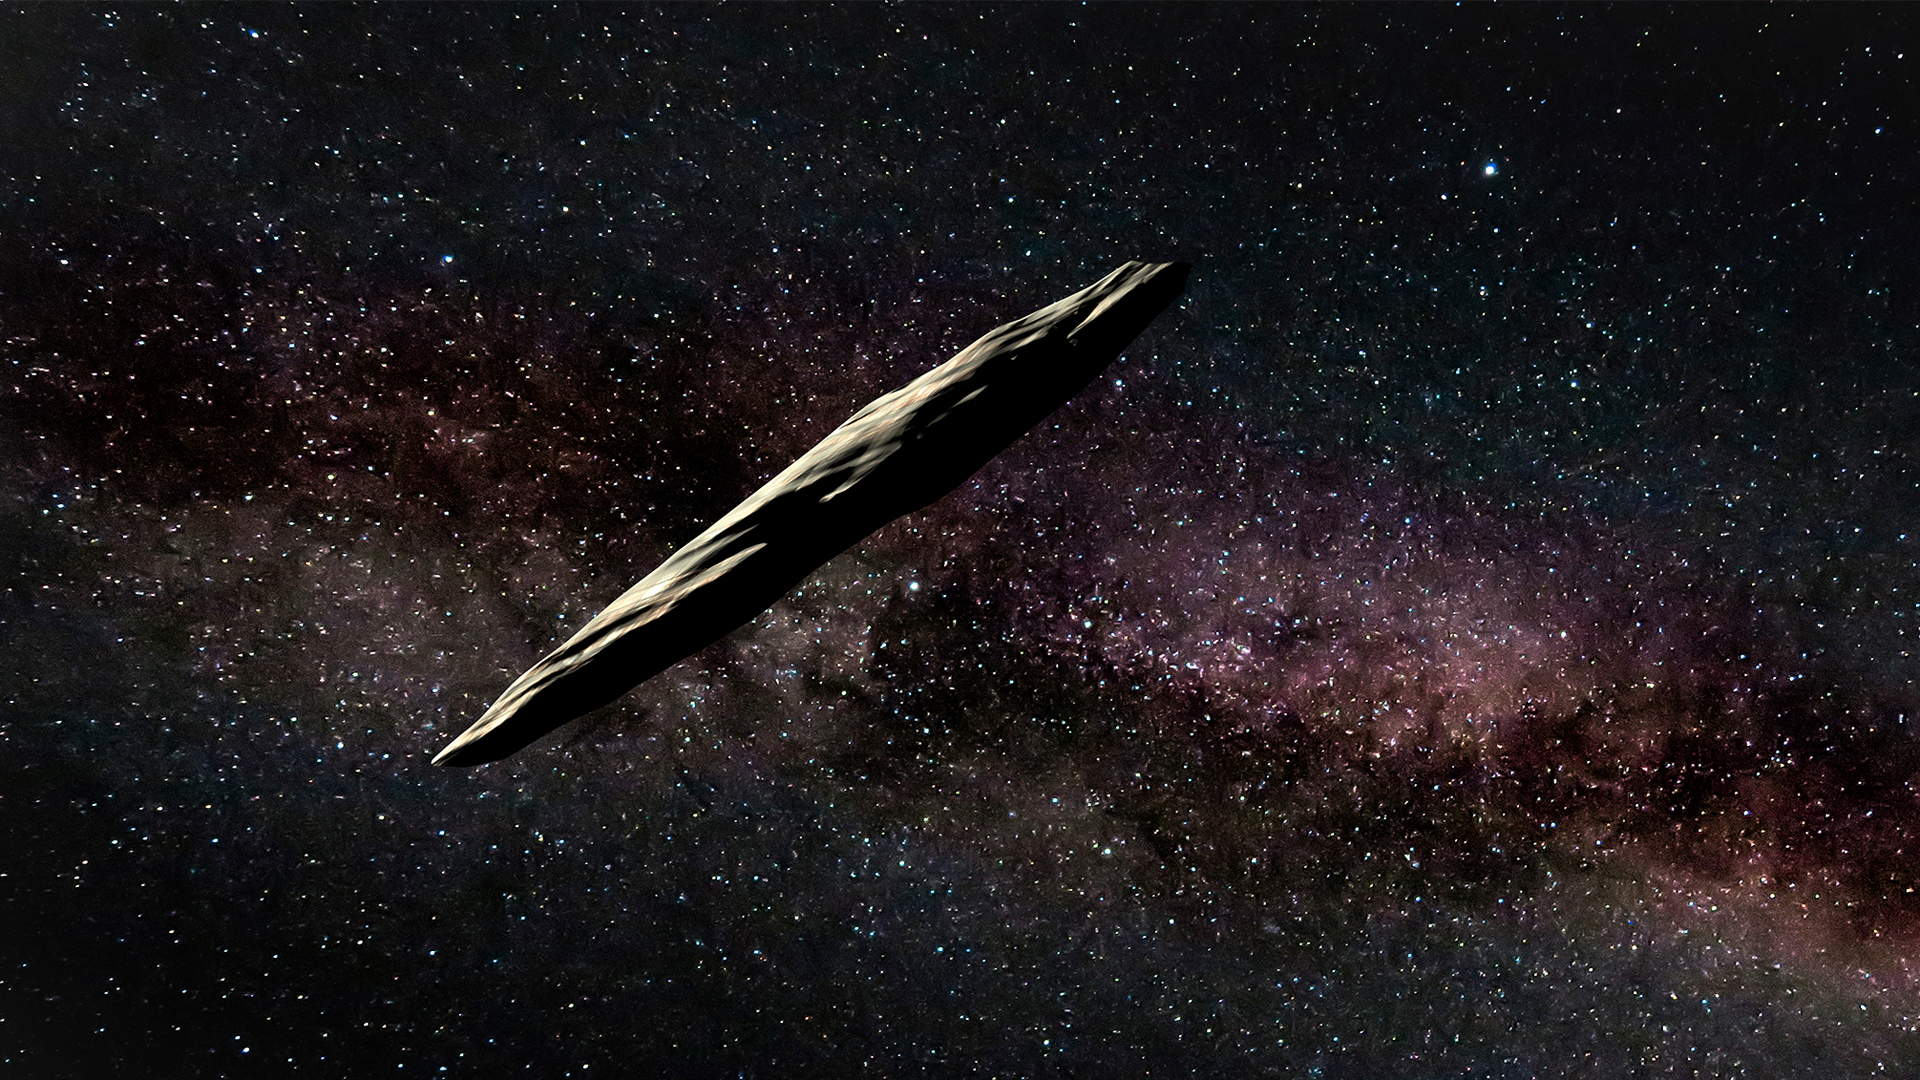 Image captured from above video clip shows artist’s interpretation of ‘Oumuamua as it approaches our Solar System. The object rotates approximately once every 7.4 hours based on the data used in this research. Credit: Gemini Observatory/AURA/NSF image by Joy Pollard